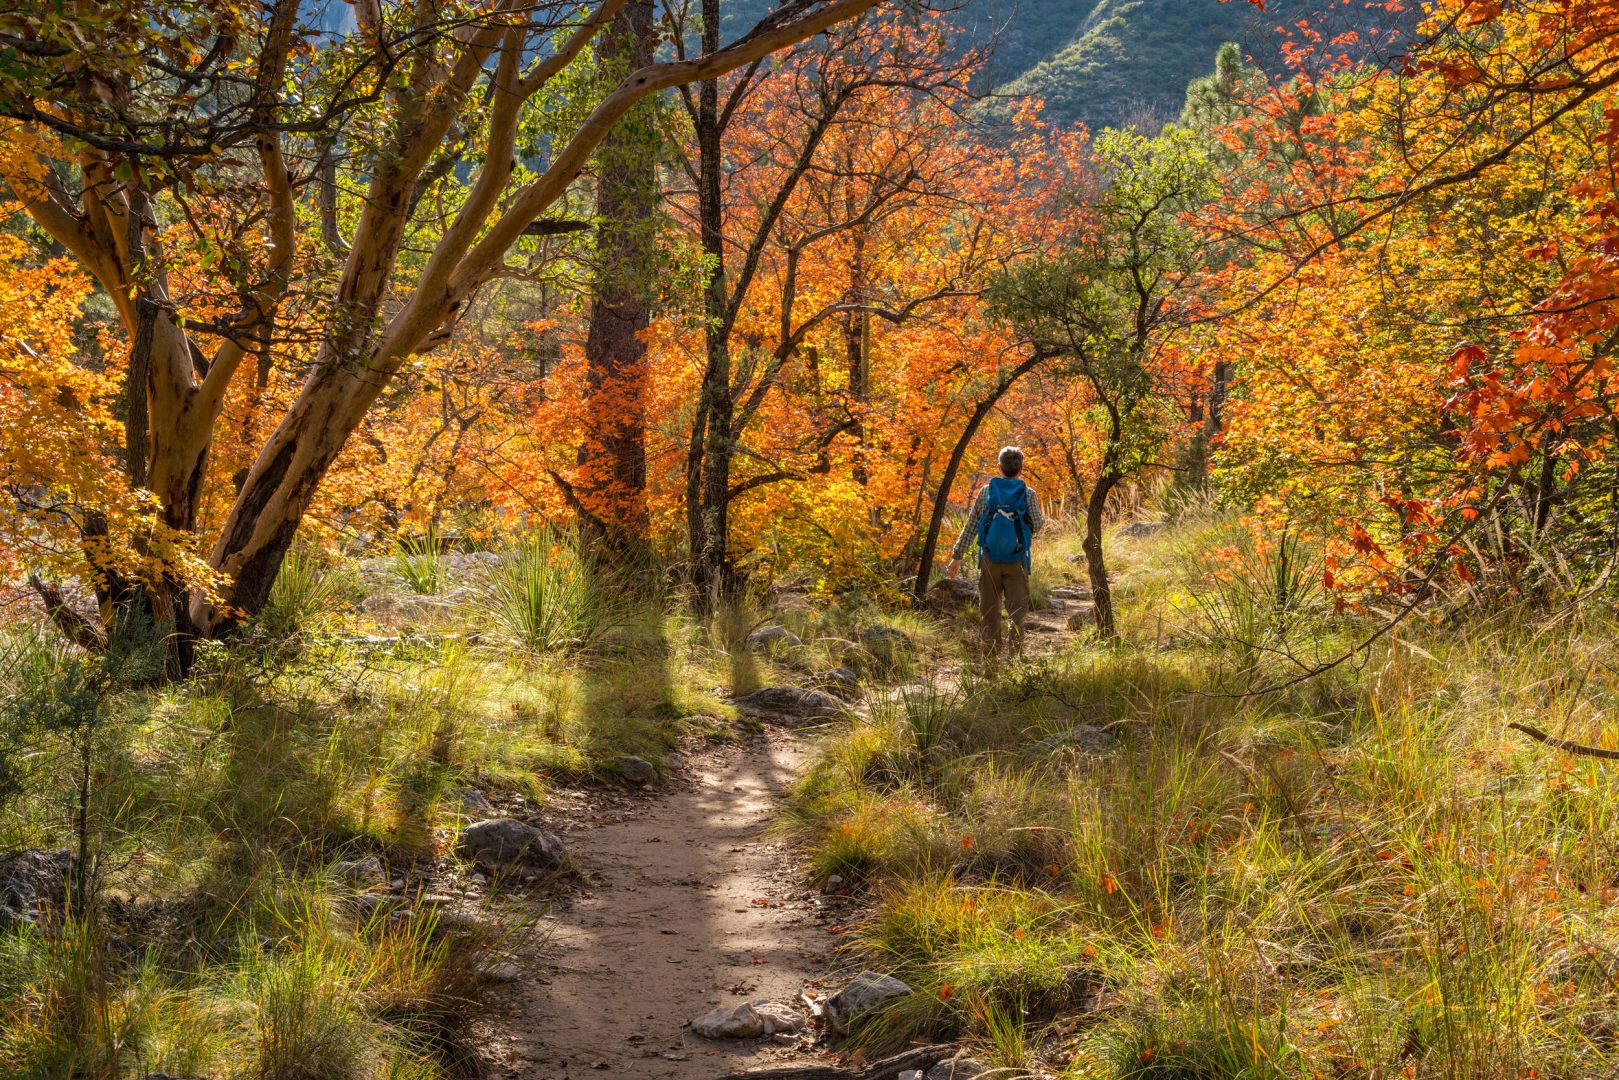 A hiker wearing a blue backpack walks on a trail that winds through trees with yellow, orange, and green leaves. Sunlight streams through the branches and shadows of tree trunks and branches stretch across the ground.